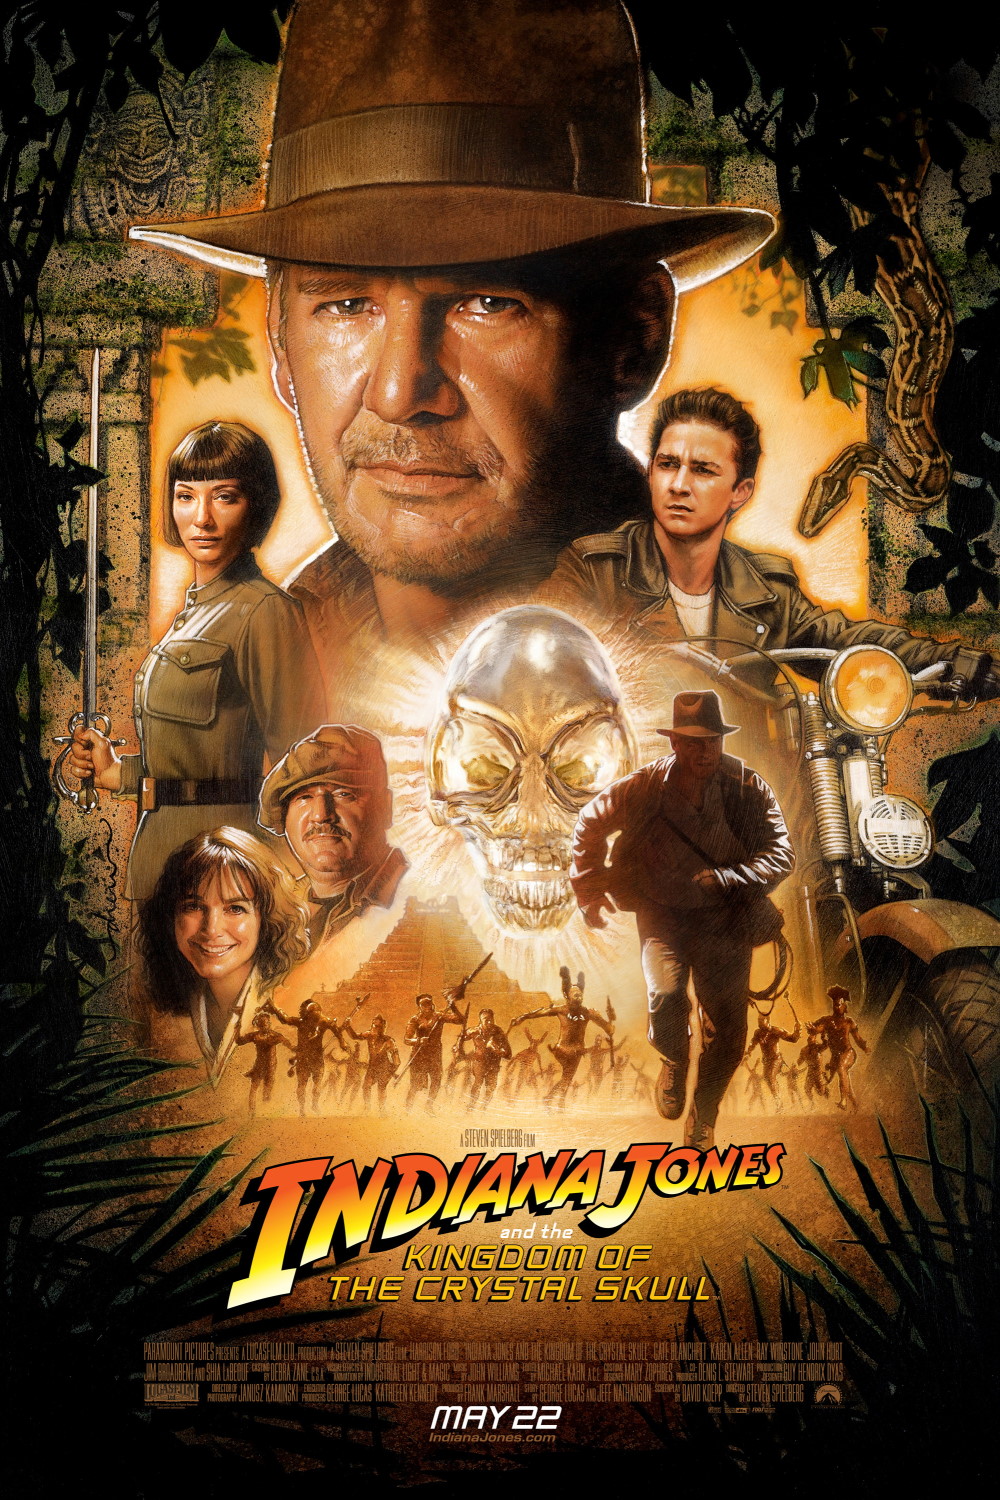 Indiana Jones and the Kingdom of the Crystal Skull (2008) Poster